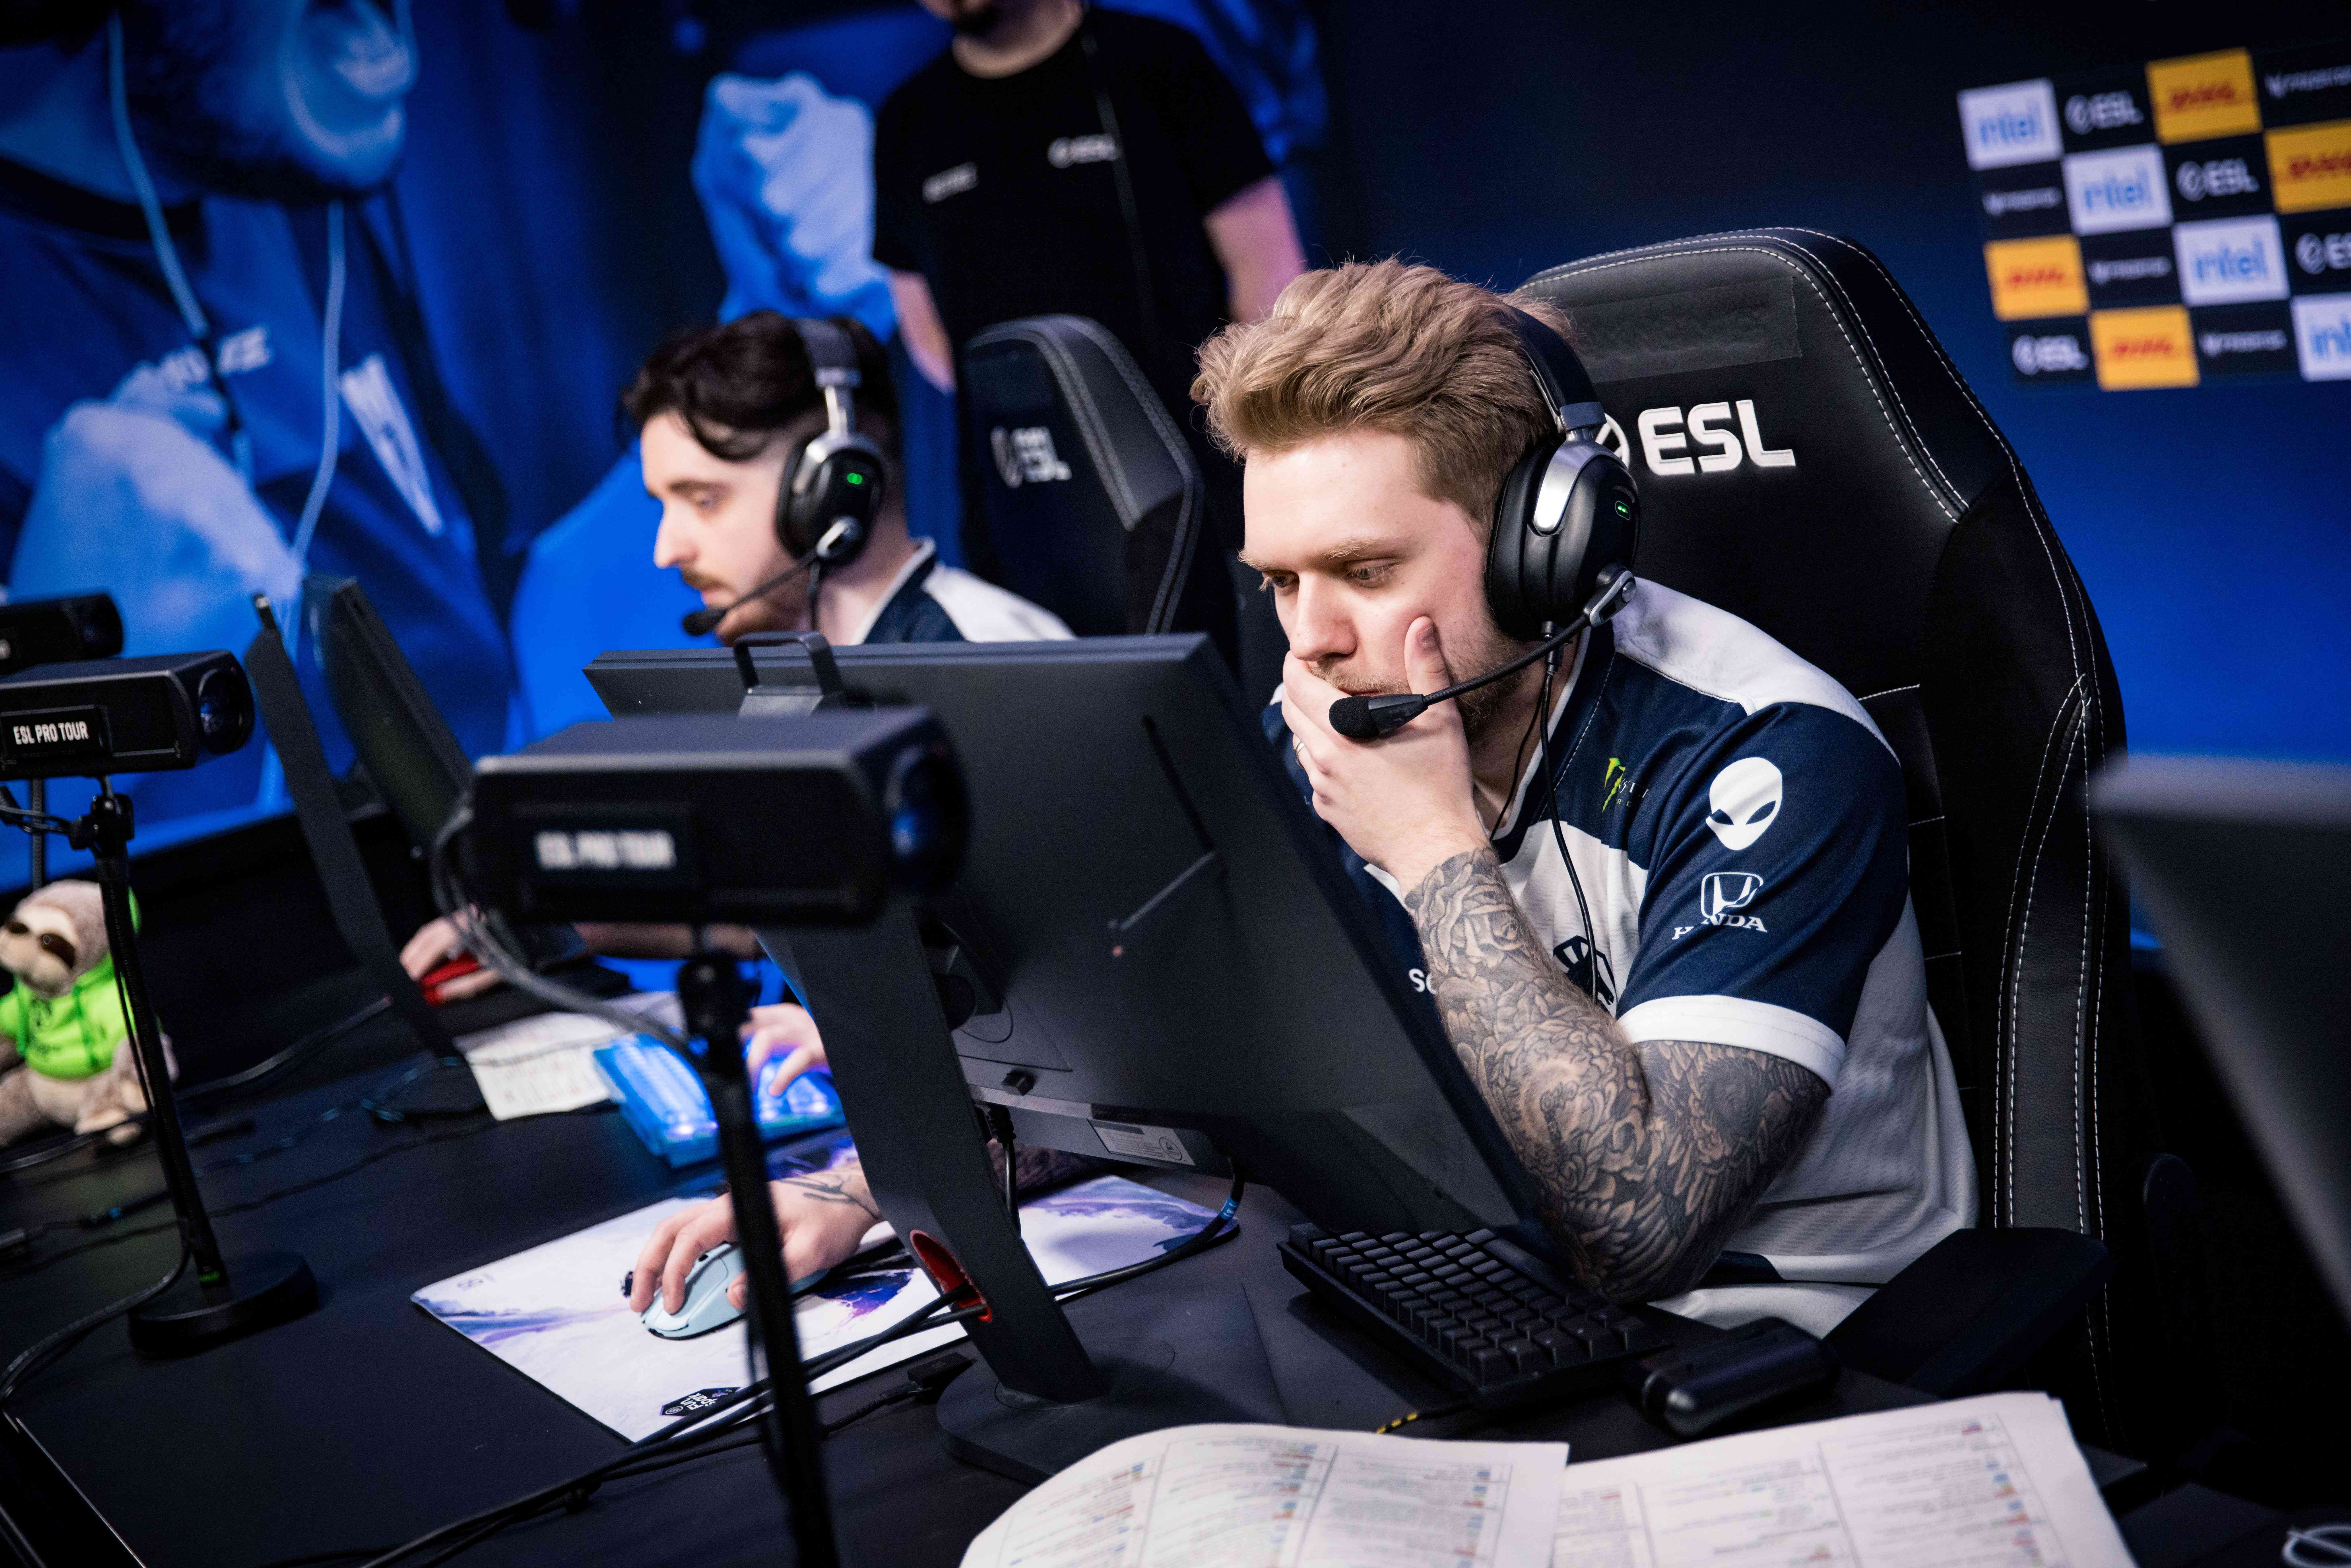 Patsi’s selflessness on the T-side reminded many of nitr0’s role in the team (Image Credits: ESL | Helena Kristiansson)